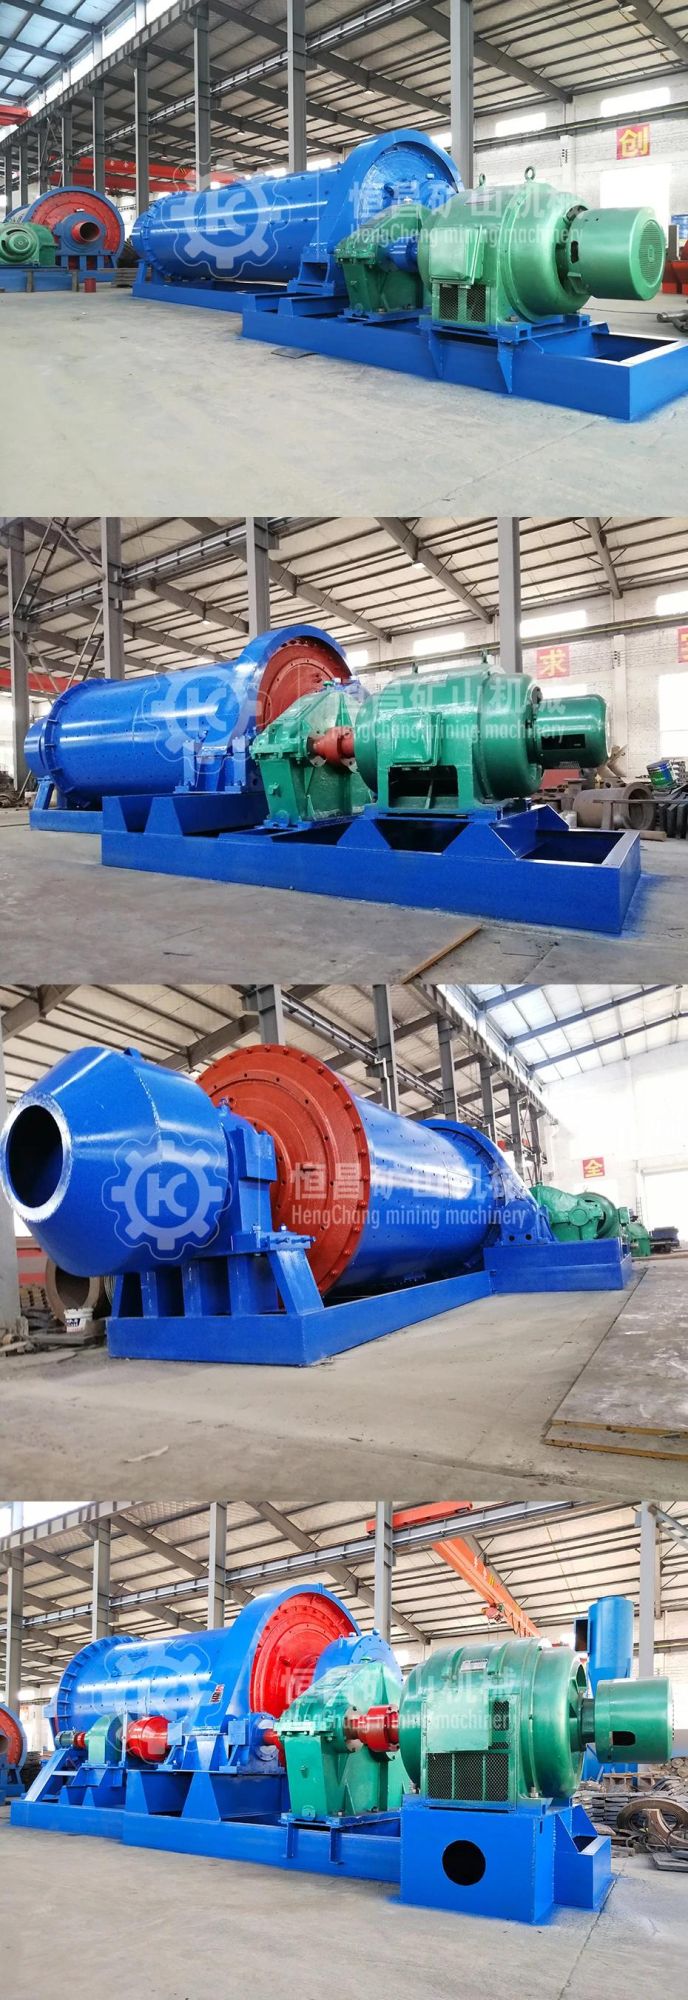 High Quality Ball Grinding Mill for Grinding Plant, Small Ball Mill for Grinding Iron Ore